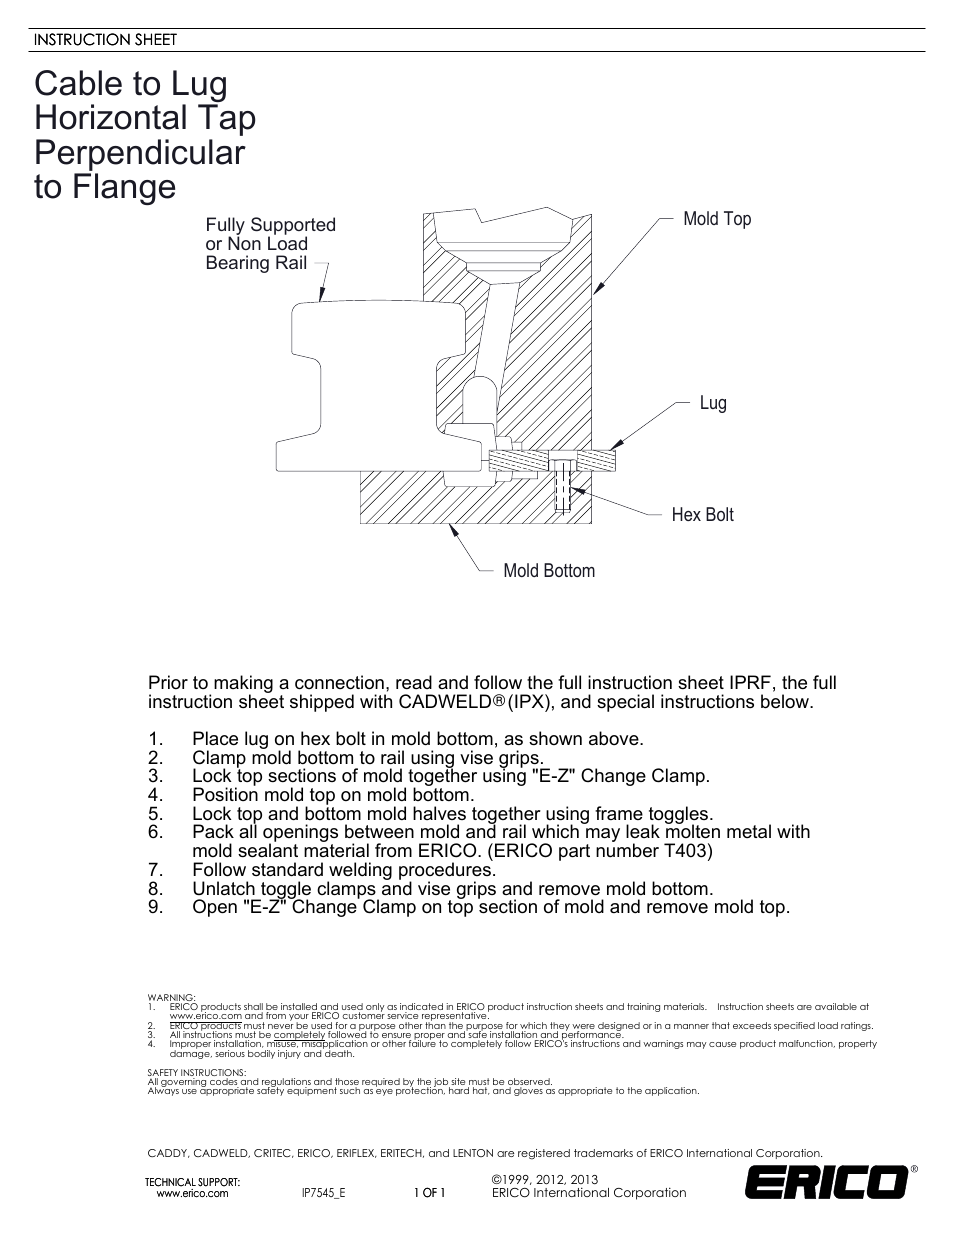 IP7545 Cable to Lug Horizontal Tap Perpendicular to Flange